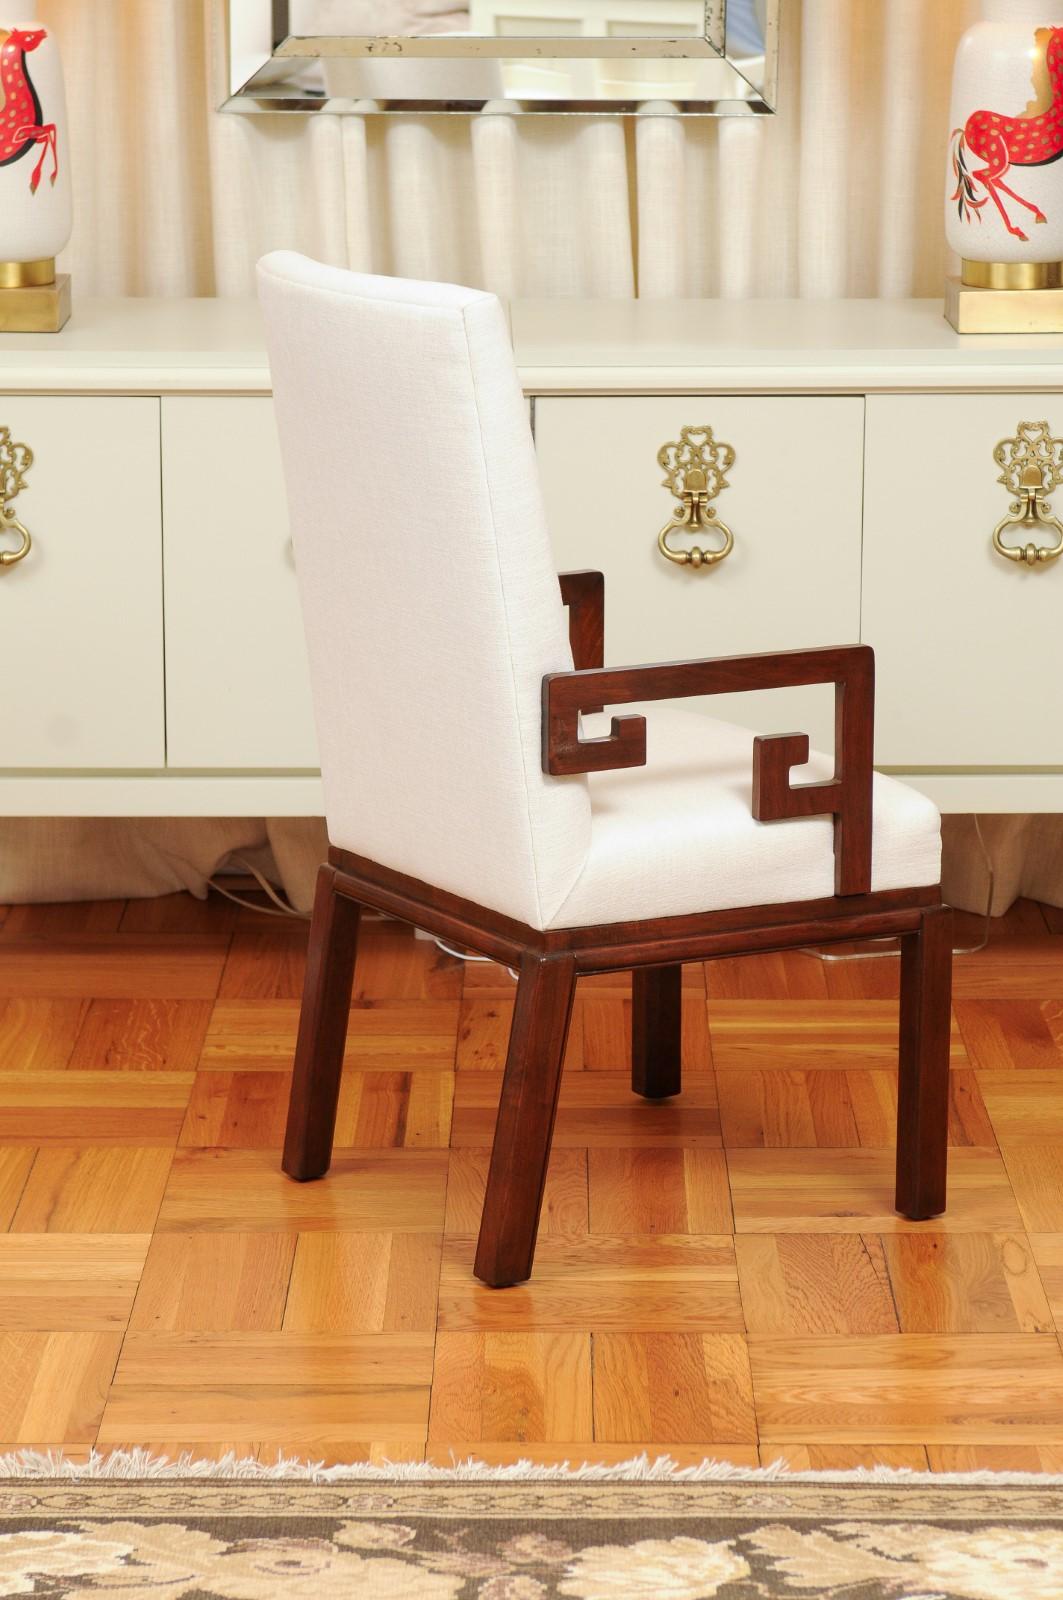 All Arms - Sublime Set of 8 Greek Key Parsons Chairs by Michael Taylor In Excellent Condition For Sale In Atlanta, GA